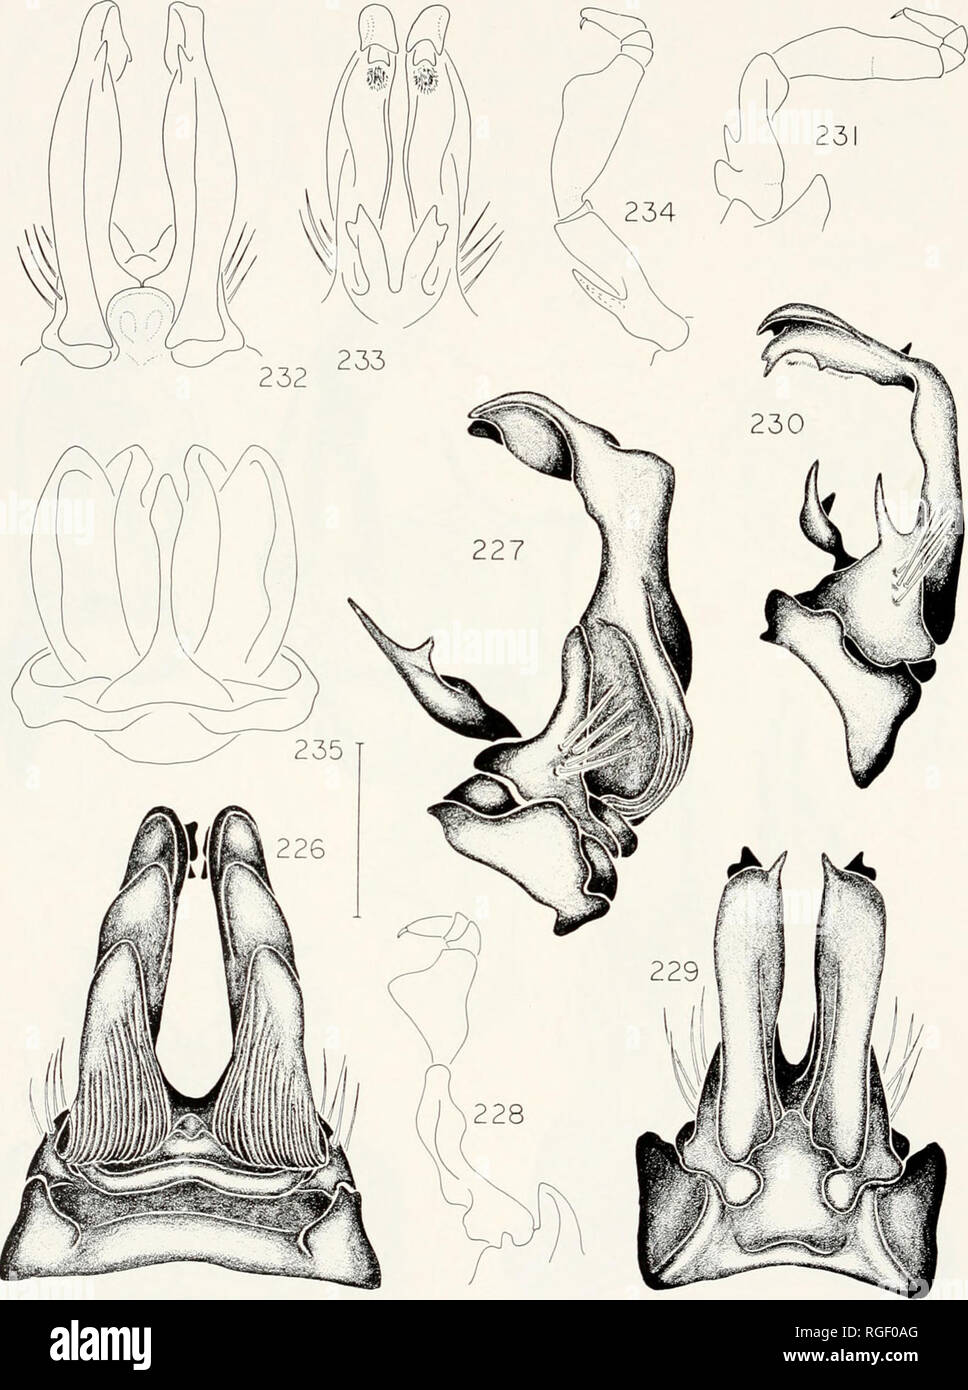 . Bulletin of the Museum of Comparative Zoology at Harvard College. Zoology. 310 BuUclin Museum of Comparative Zoology, Vol. 144, No. 4. Figures 226-235. Anatomy of C/e/dogono spp. Figs. 226-228. C. maculata. Fig. 226. Anterior gonopods, anterior view. Fig. 227. Left anterior gonopod, lateral view. Fig. 228. Right posterior gonopod, anterior view. Figs. 229-231. C. fizoc. Fig. 229. Anterior gonopods, anterior view. Fig. 230. Left anterior gonopod, lateral view. Fig. 231. Posterior gonopod, anterior view. Figs. 232-235. C. z/'maponiensis. Fig. 232. Anterior gonopods, anterior view. Fig. 233. An Stock Photo